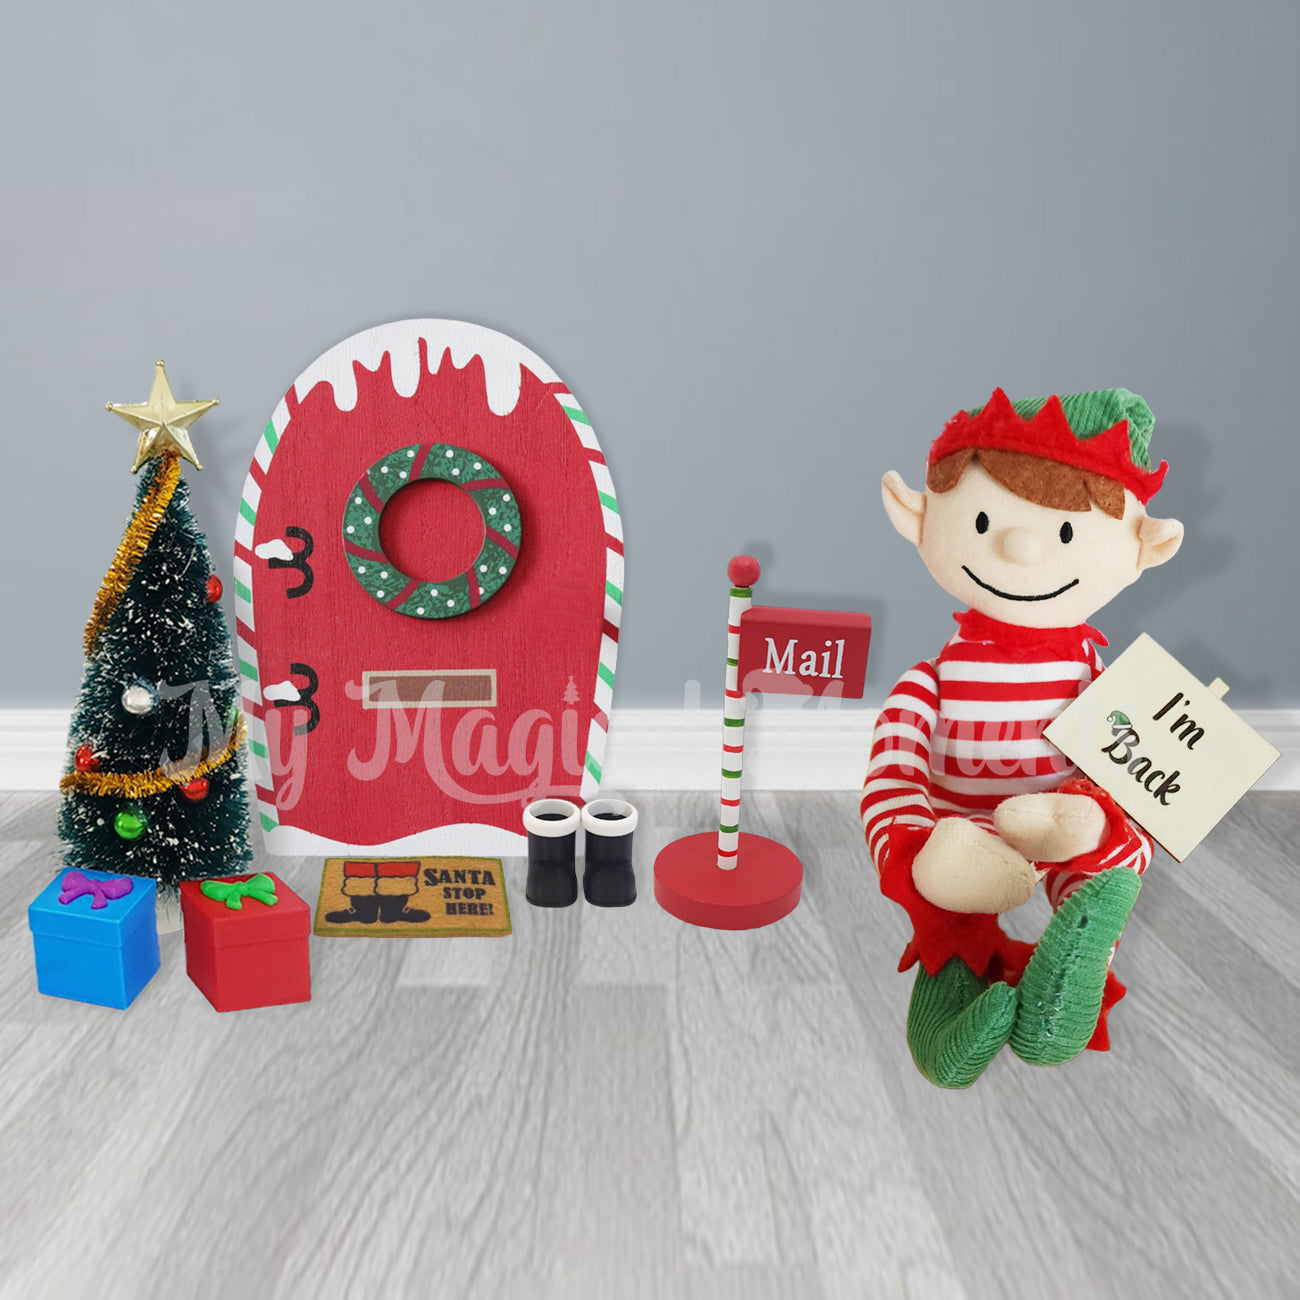 Elf holding an I'm back sign next to elf door and miniature Christmas tree